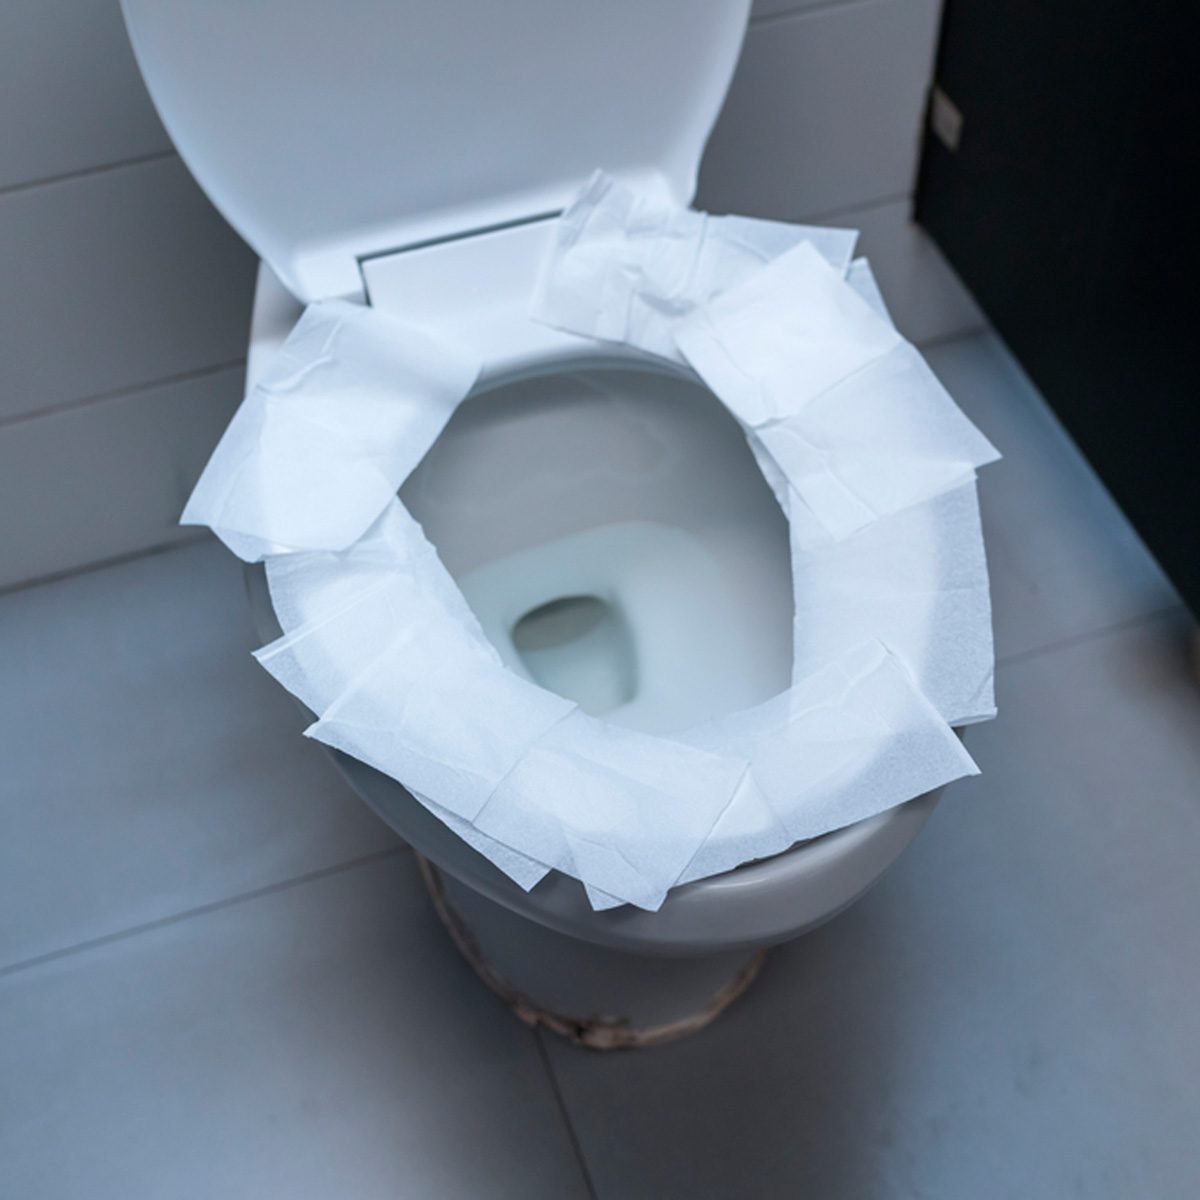 Stop Believing This Toilet Myth